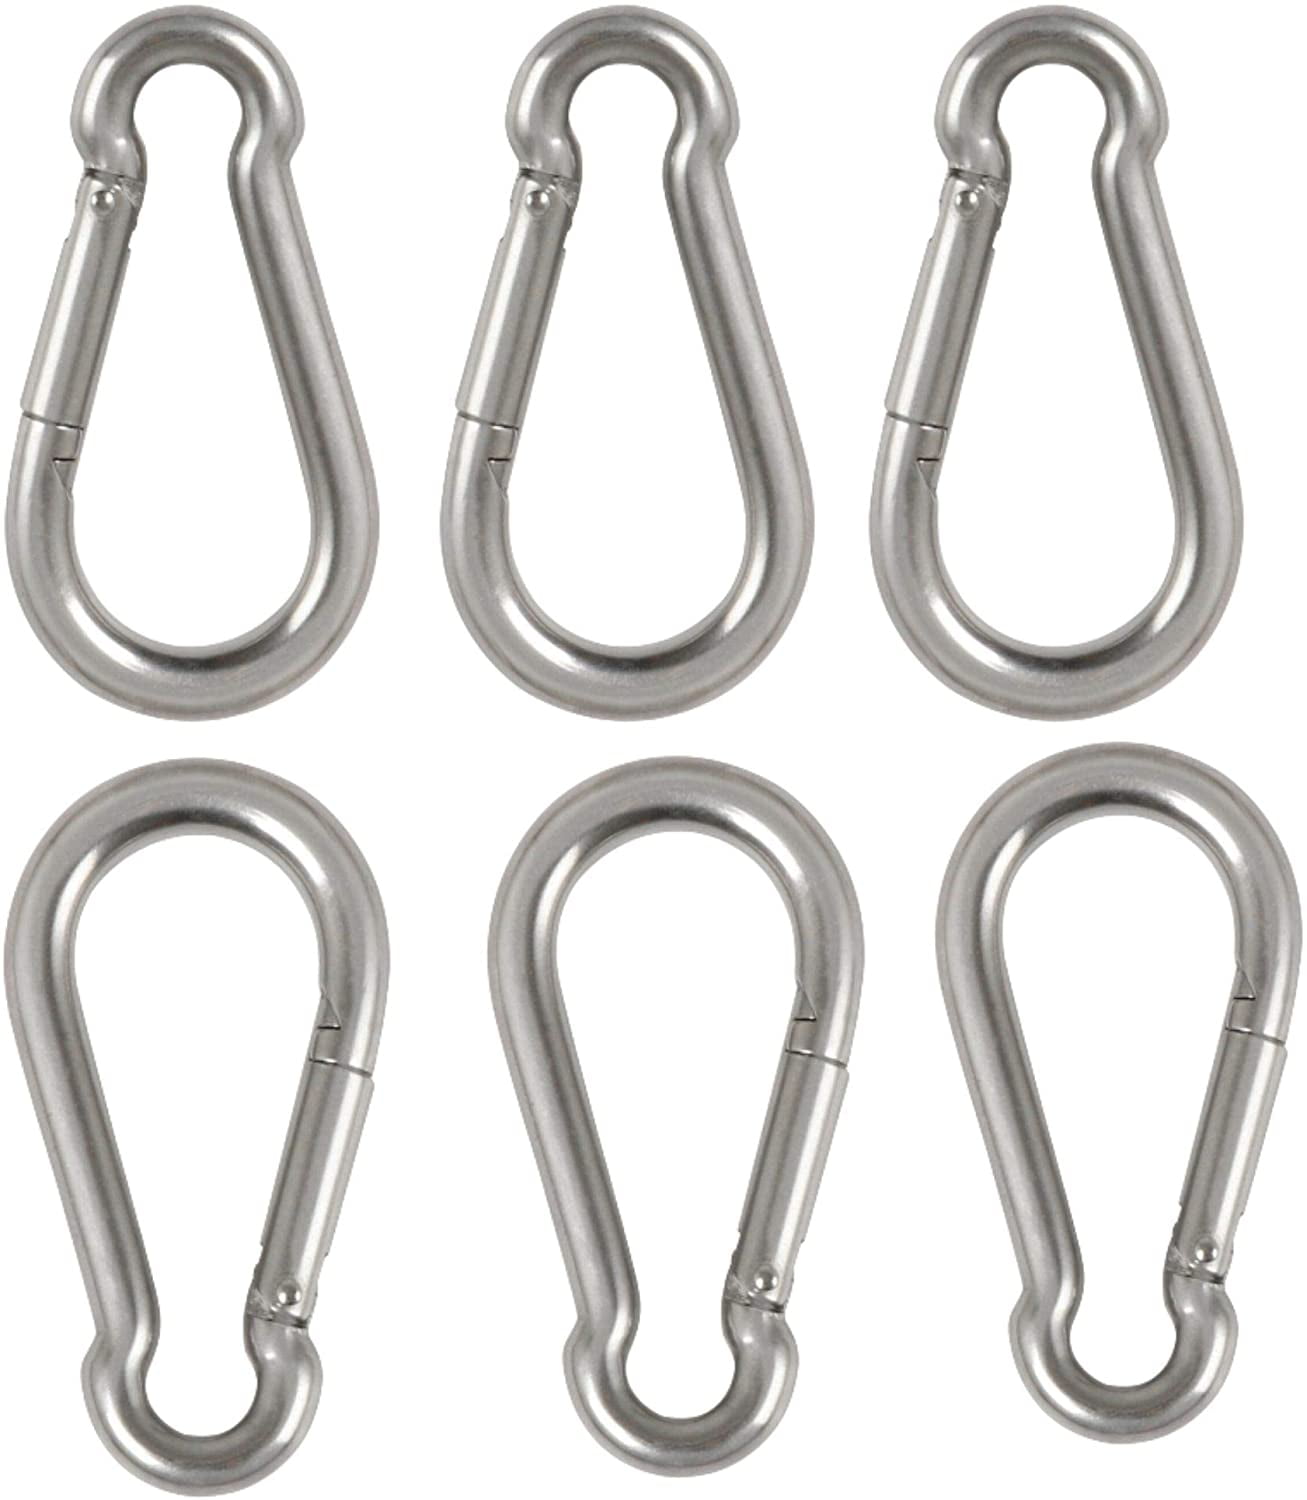 Stainless Steel Snap Clip Hook Carabiner Key Chain For Mountaineering Climbing 